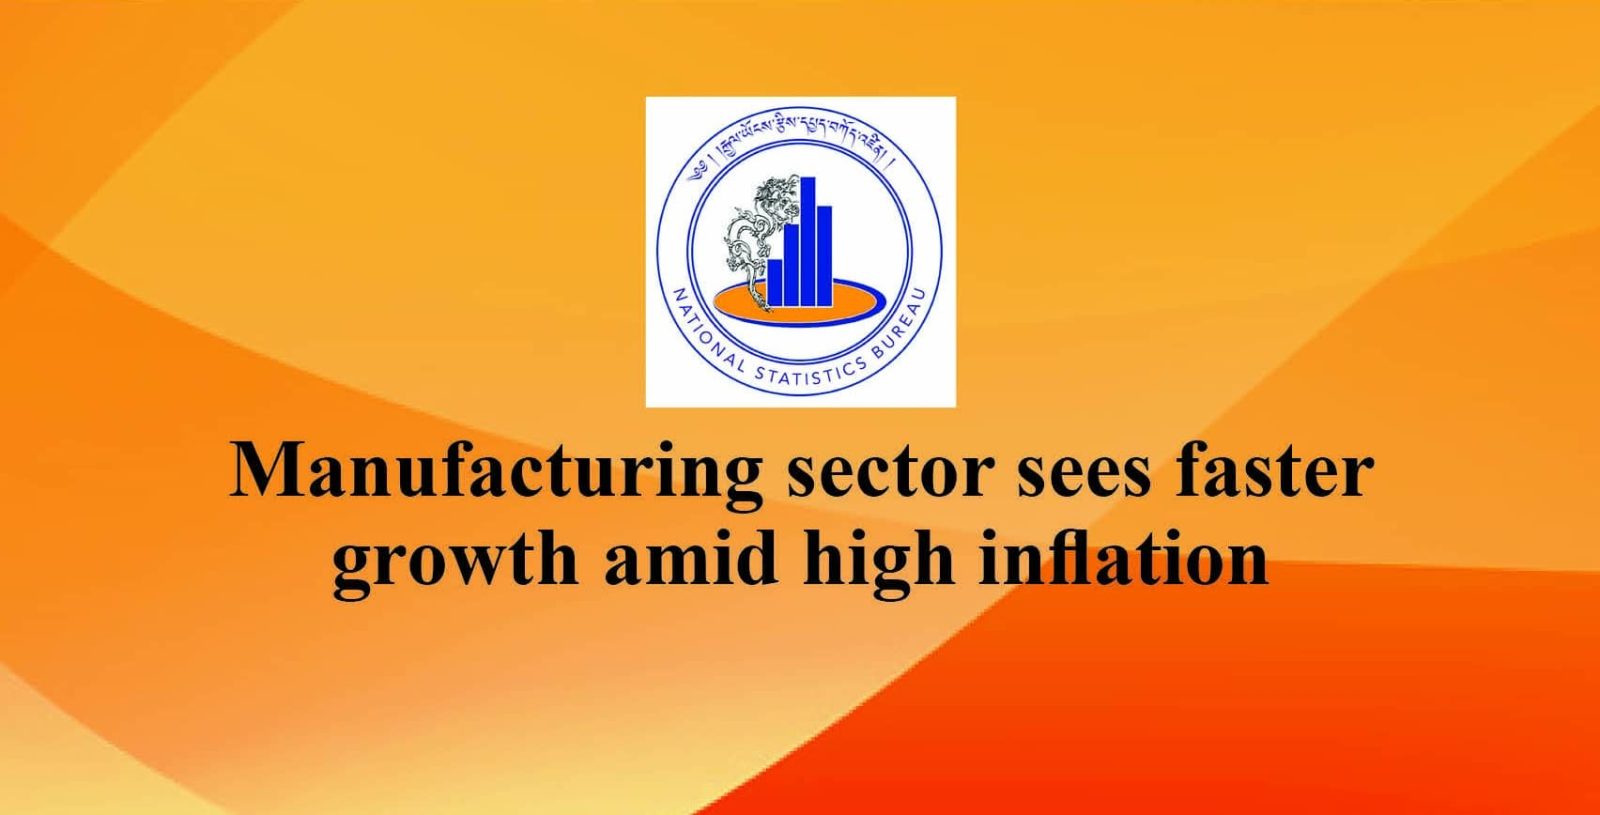 Manufacturing sector sees faster growth amid high inflation